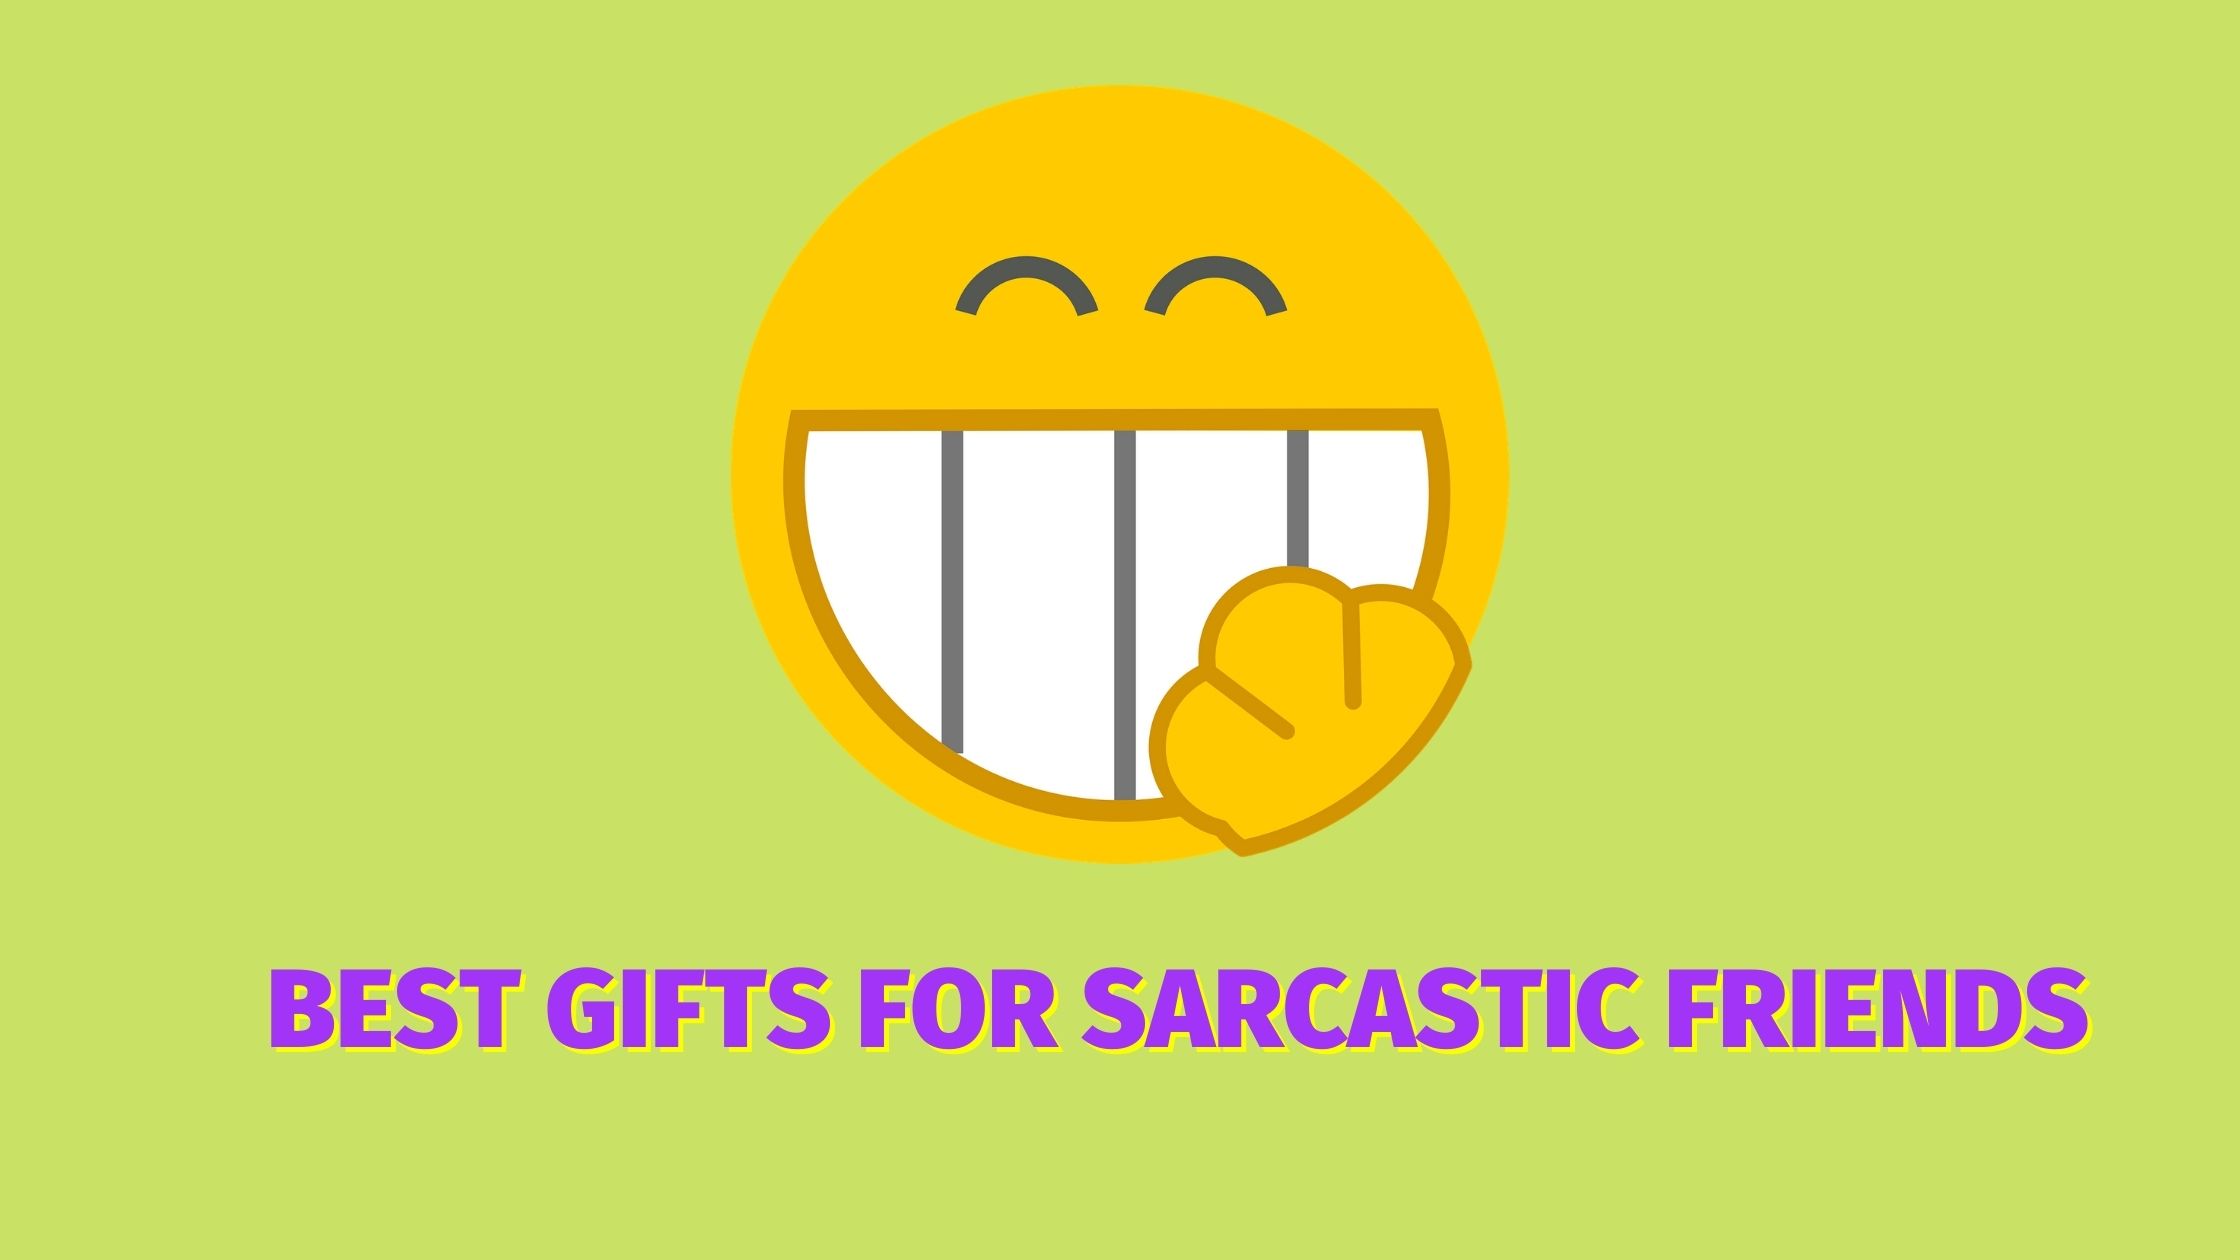 10 Best Gifts for Sarcastic Friends